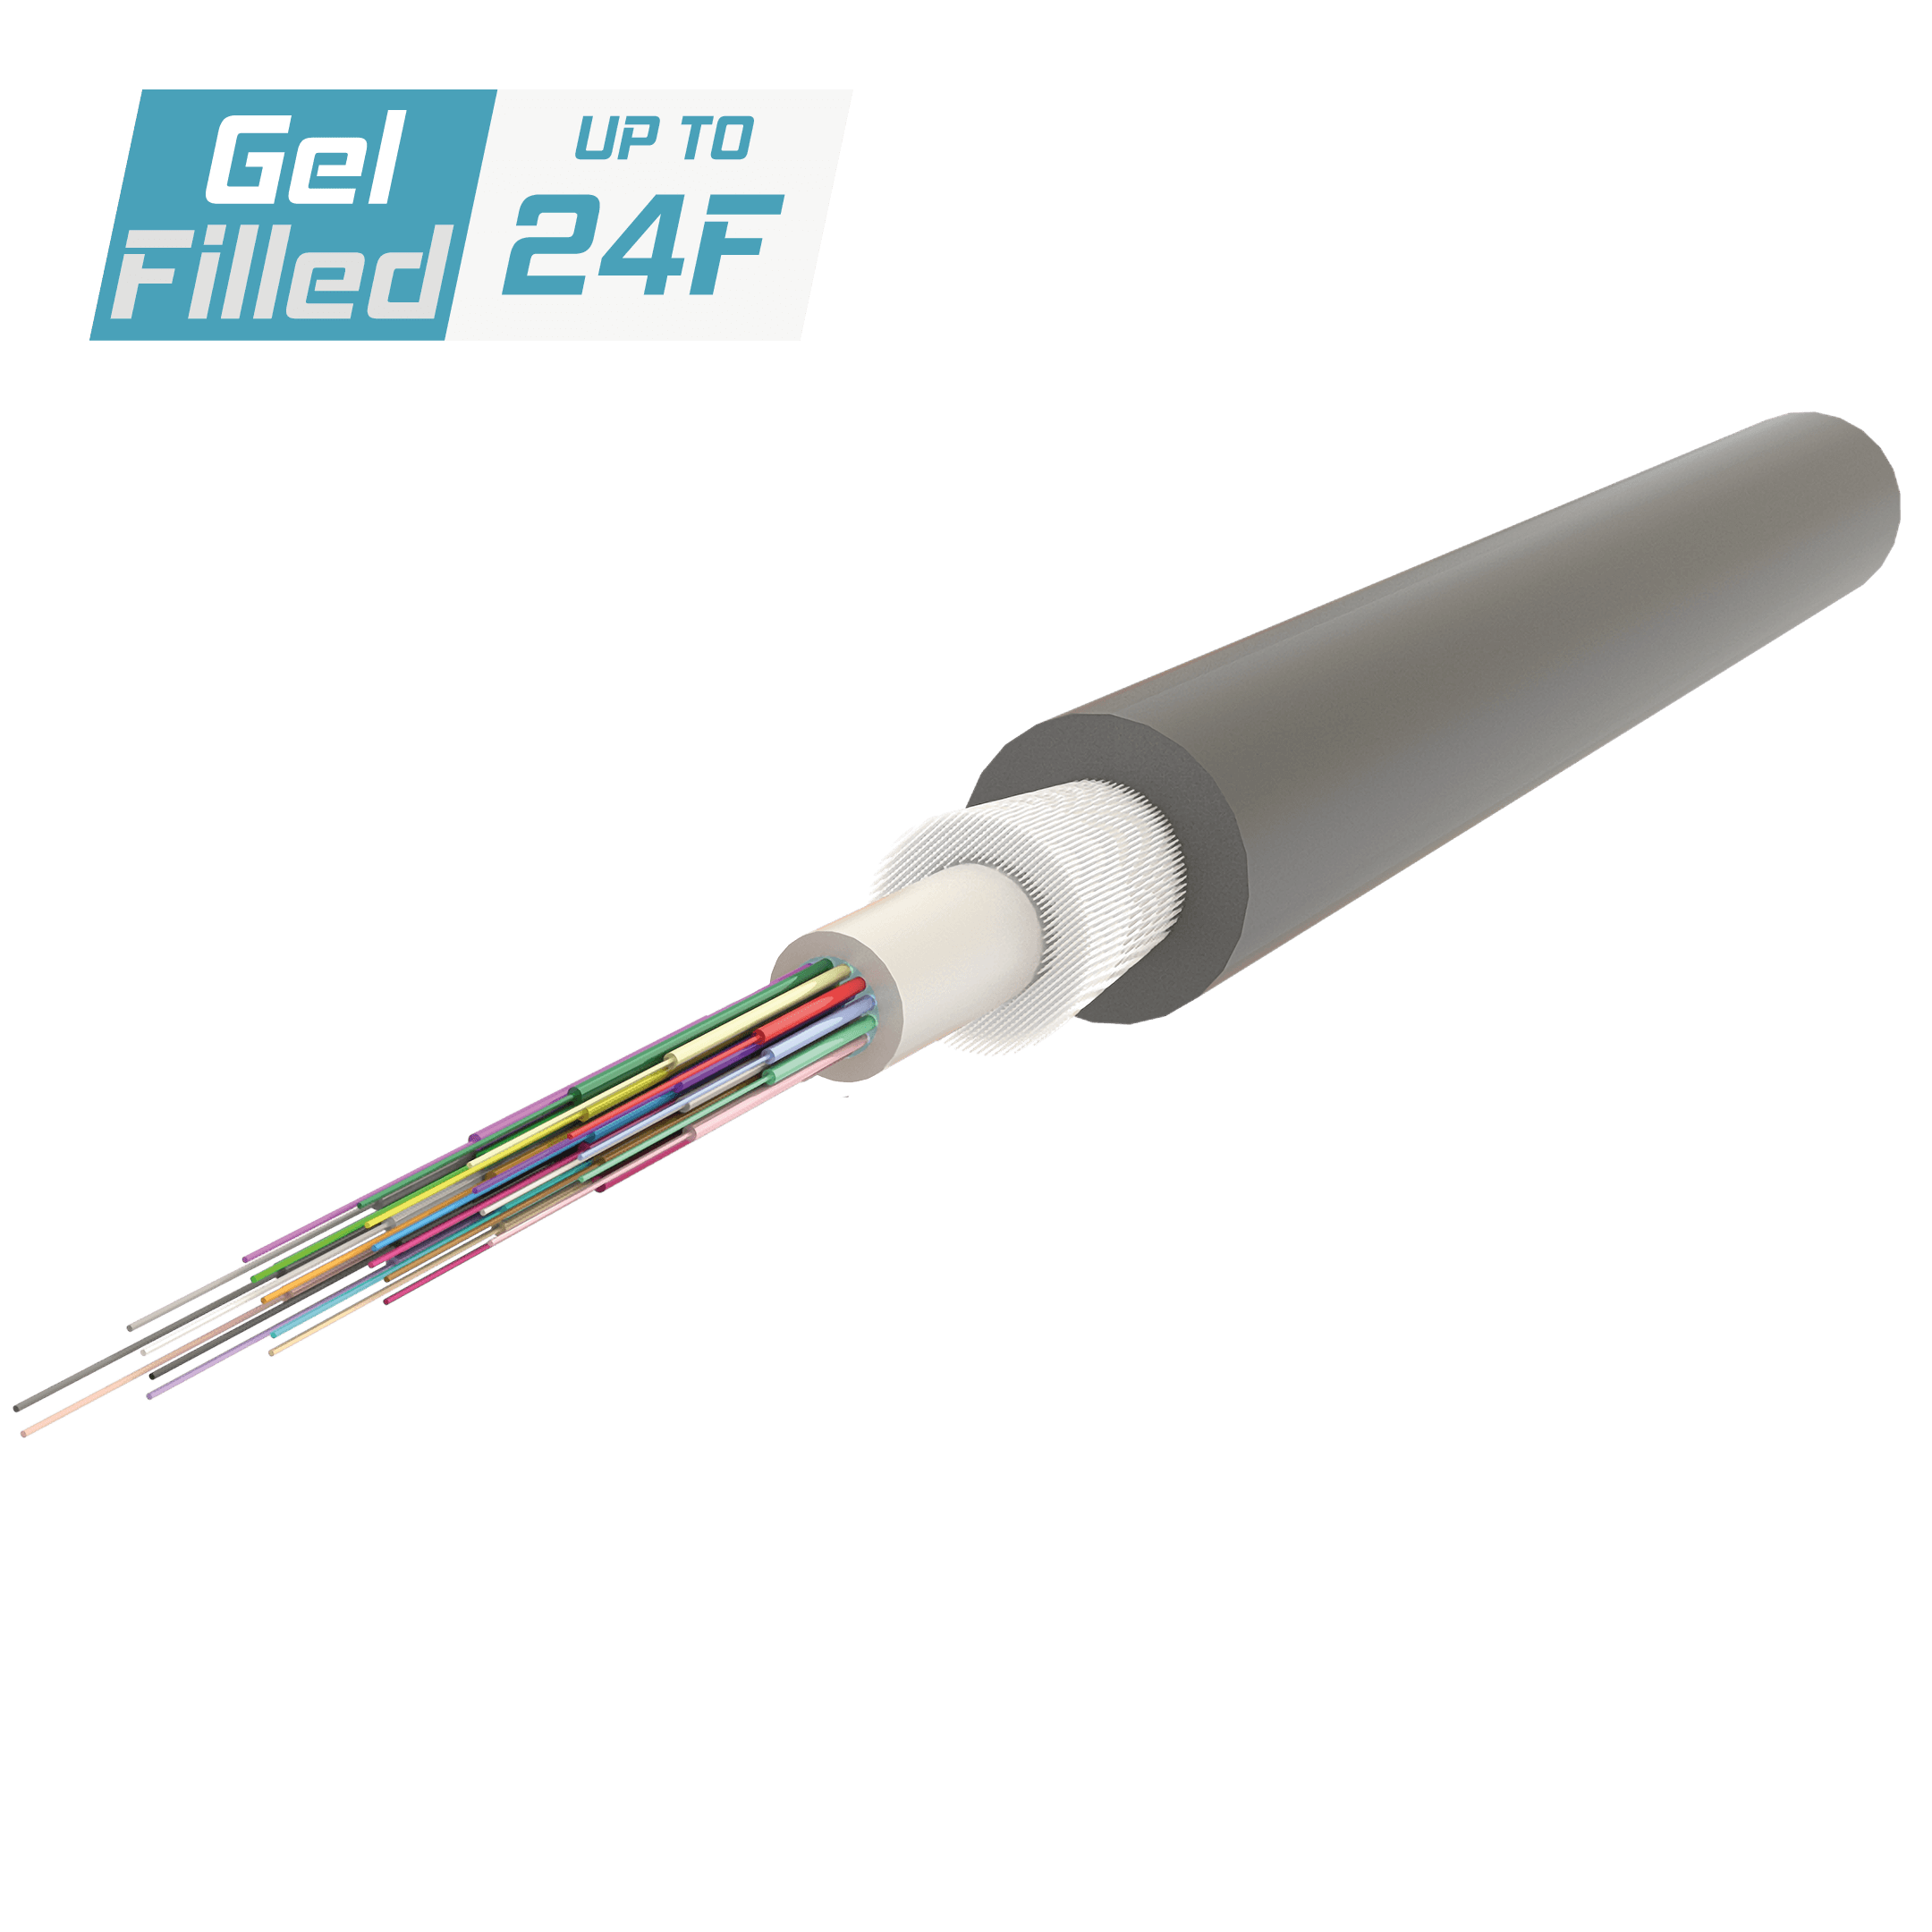 Central Loose Tube Fiber Optic Cable, Gel-Filled, A-DQ(ZN)B2Y, Up to 24F